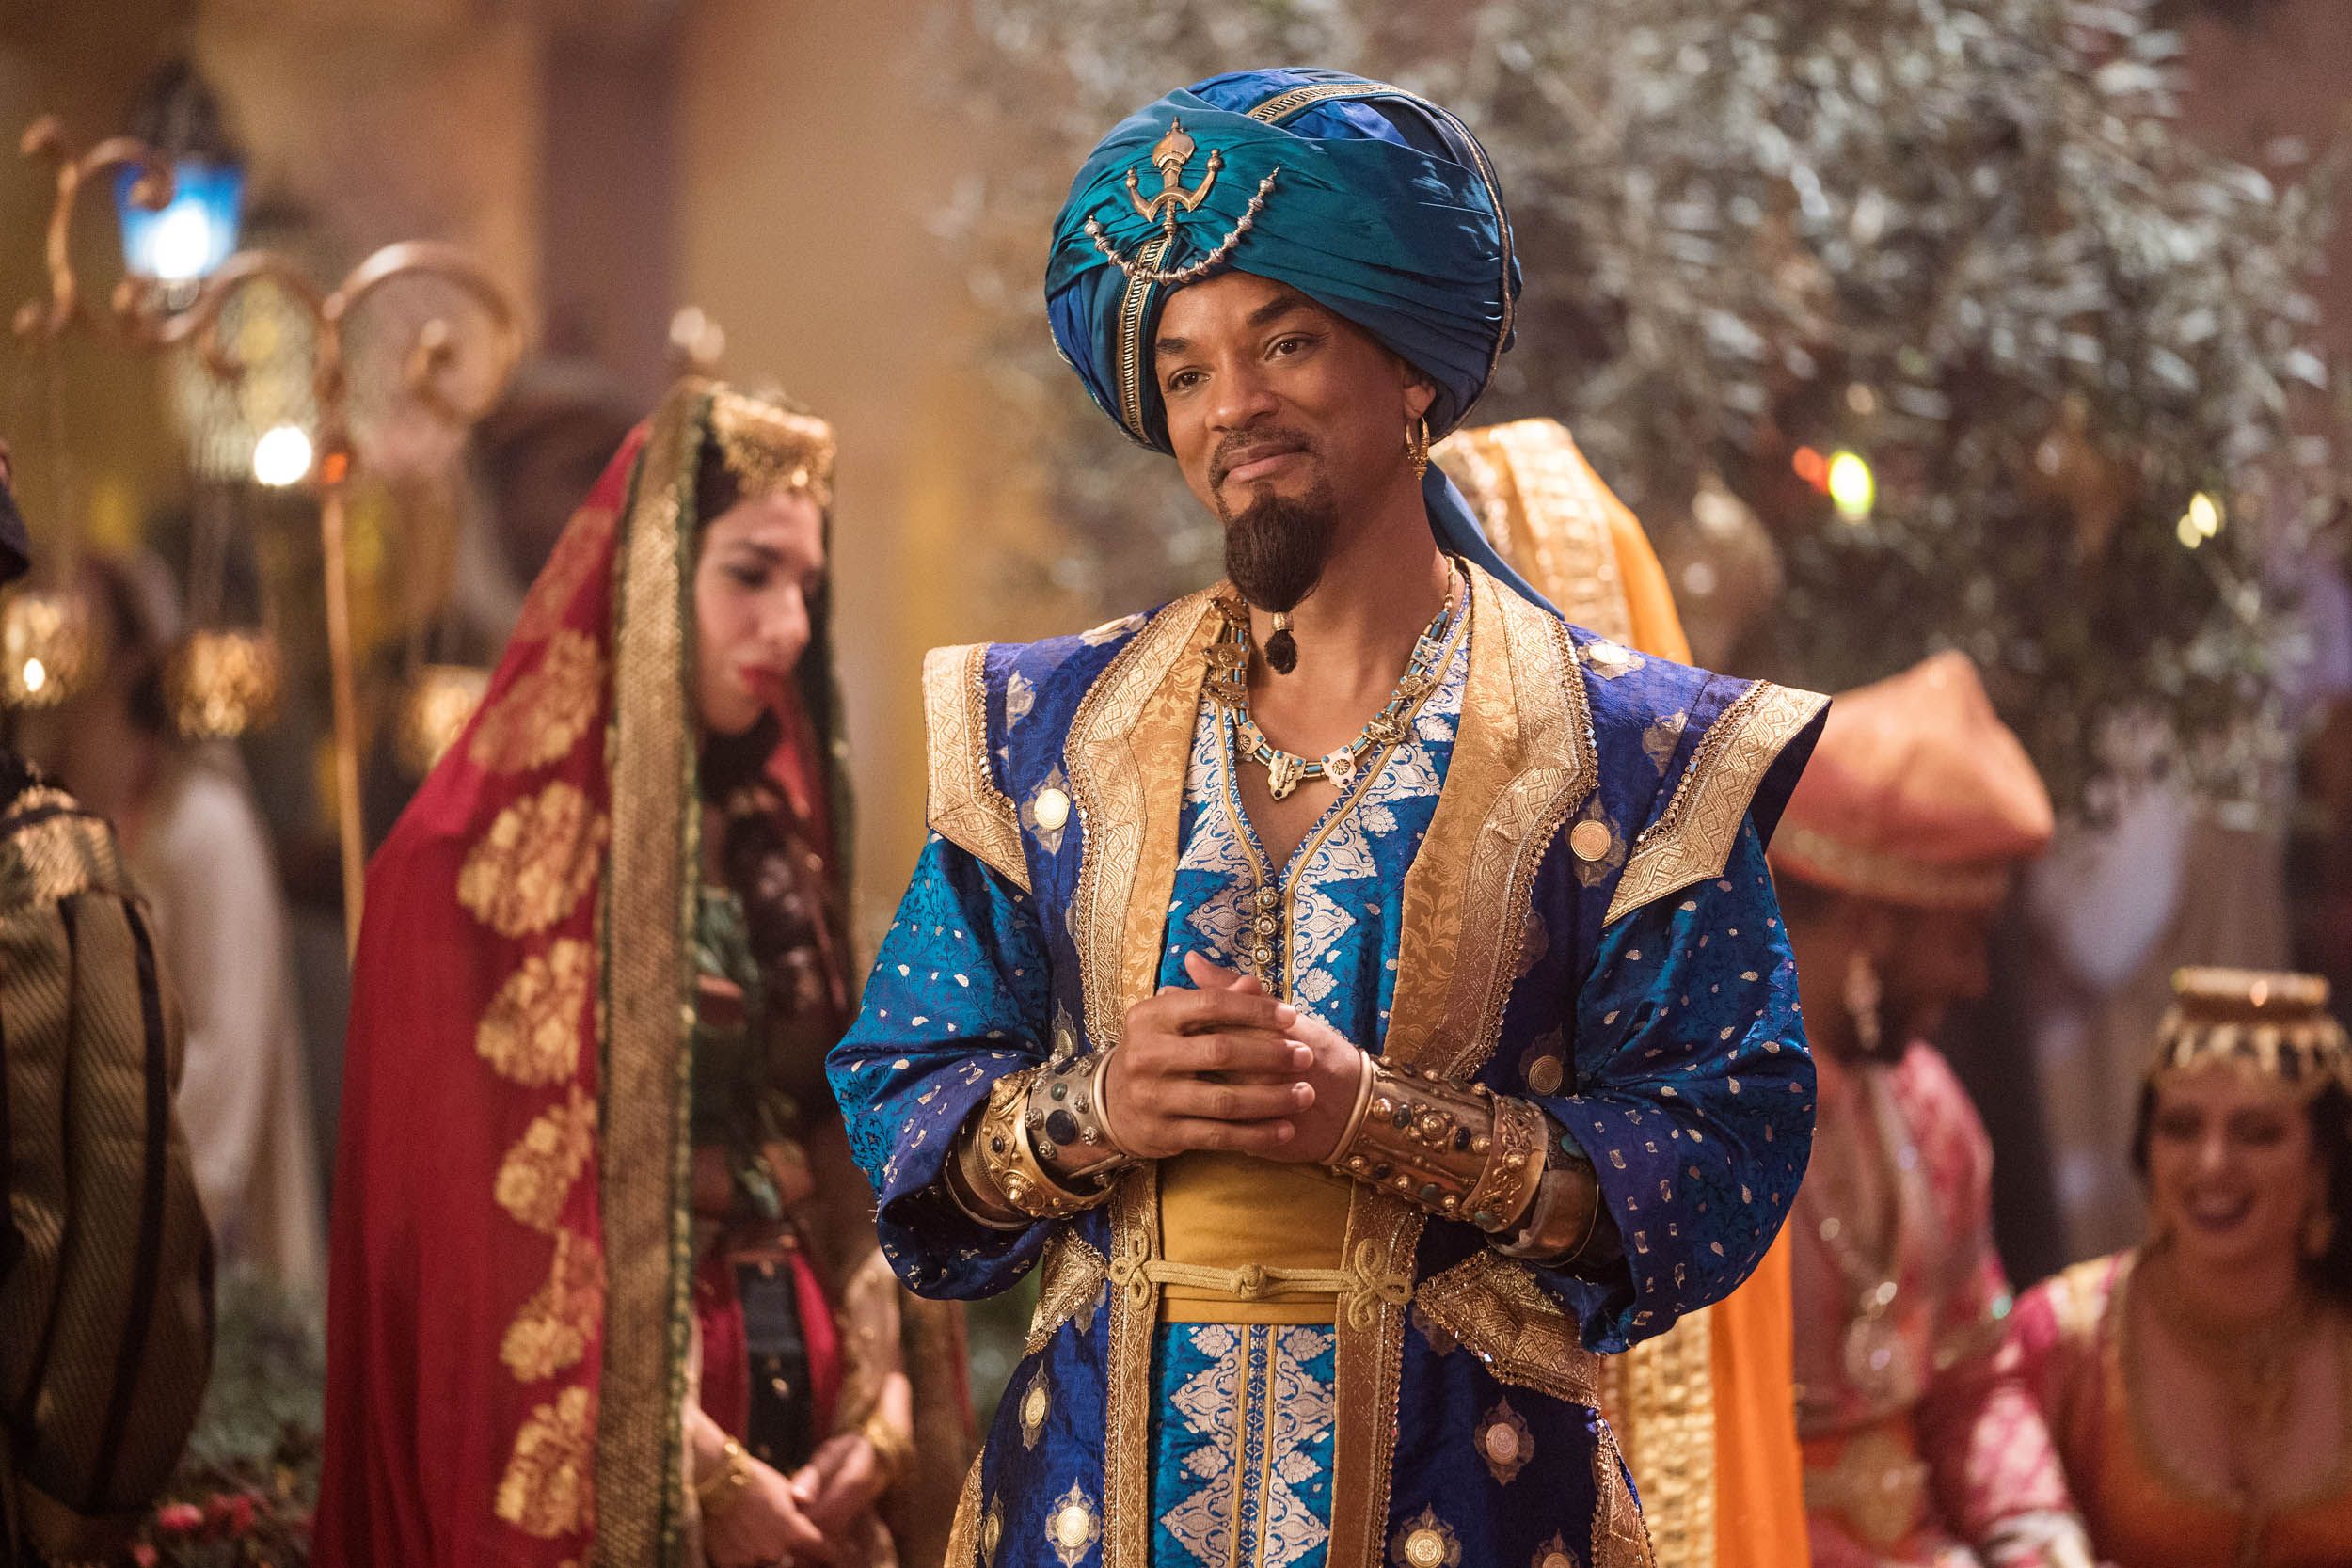 Aladdin' Live Action Movie Review: Why Did Guy Ritchie Direct a